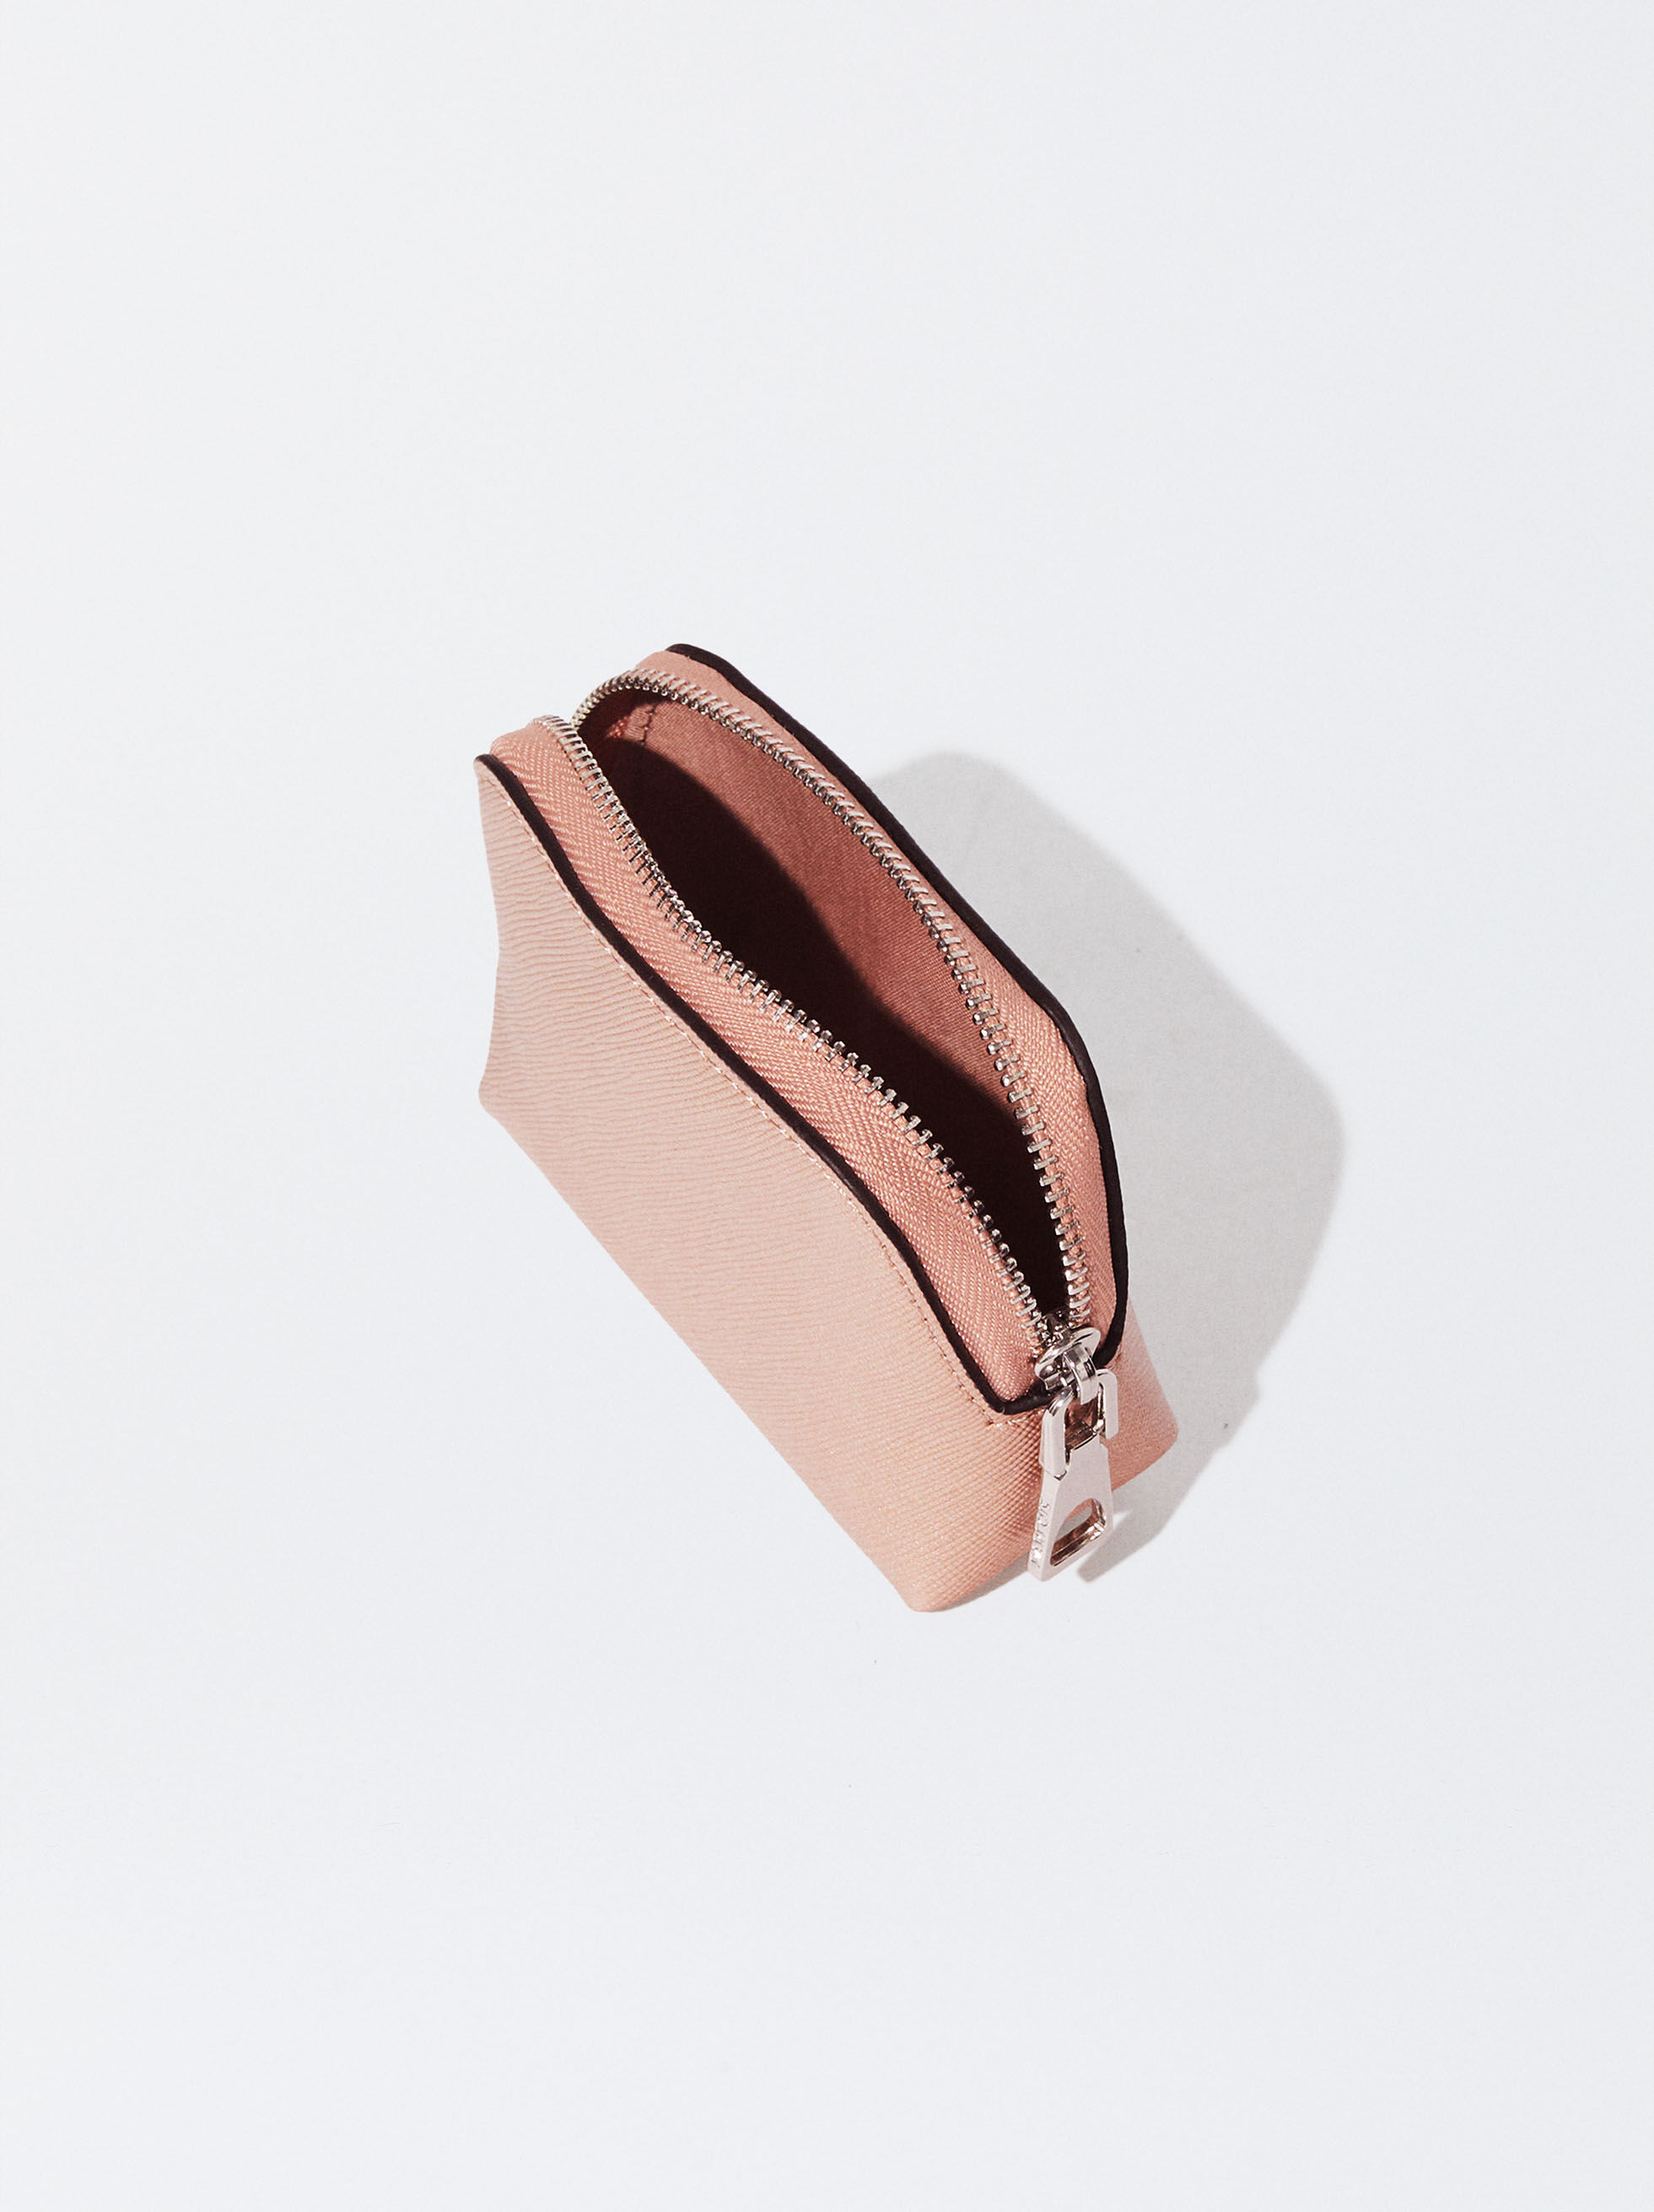 Party Handmade Rose Gold Clutch Bag at Rs 455 in New Delhi | ID: 24220499362